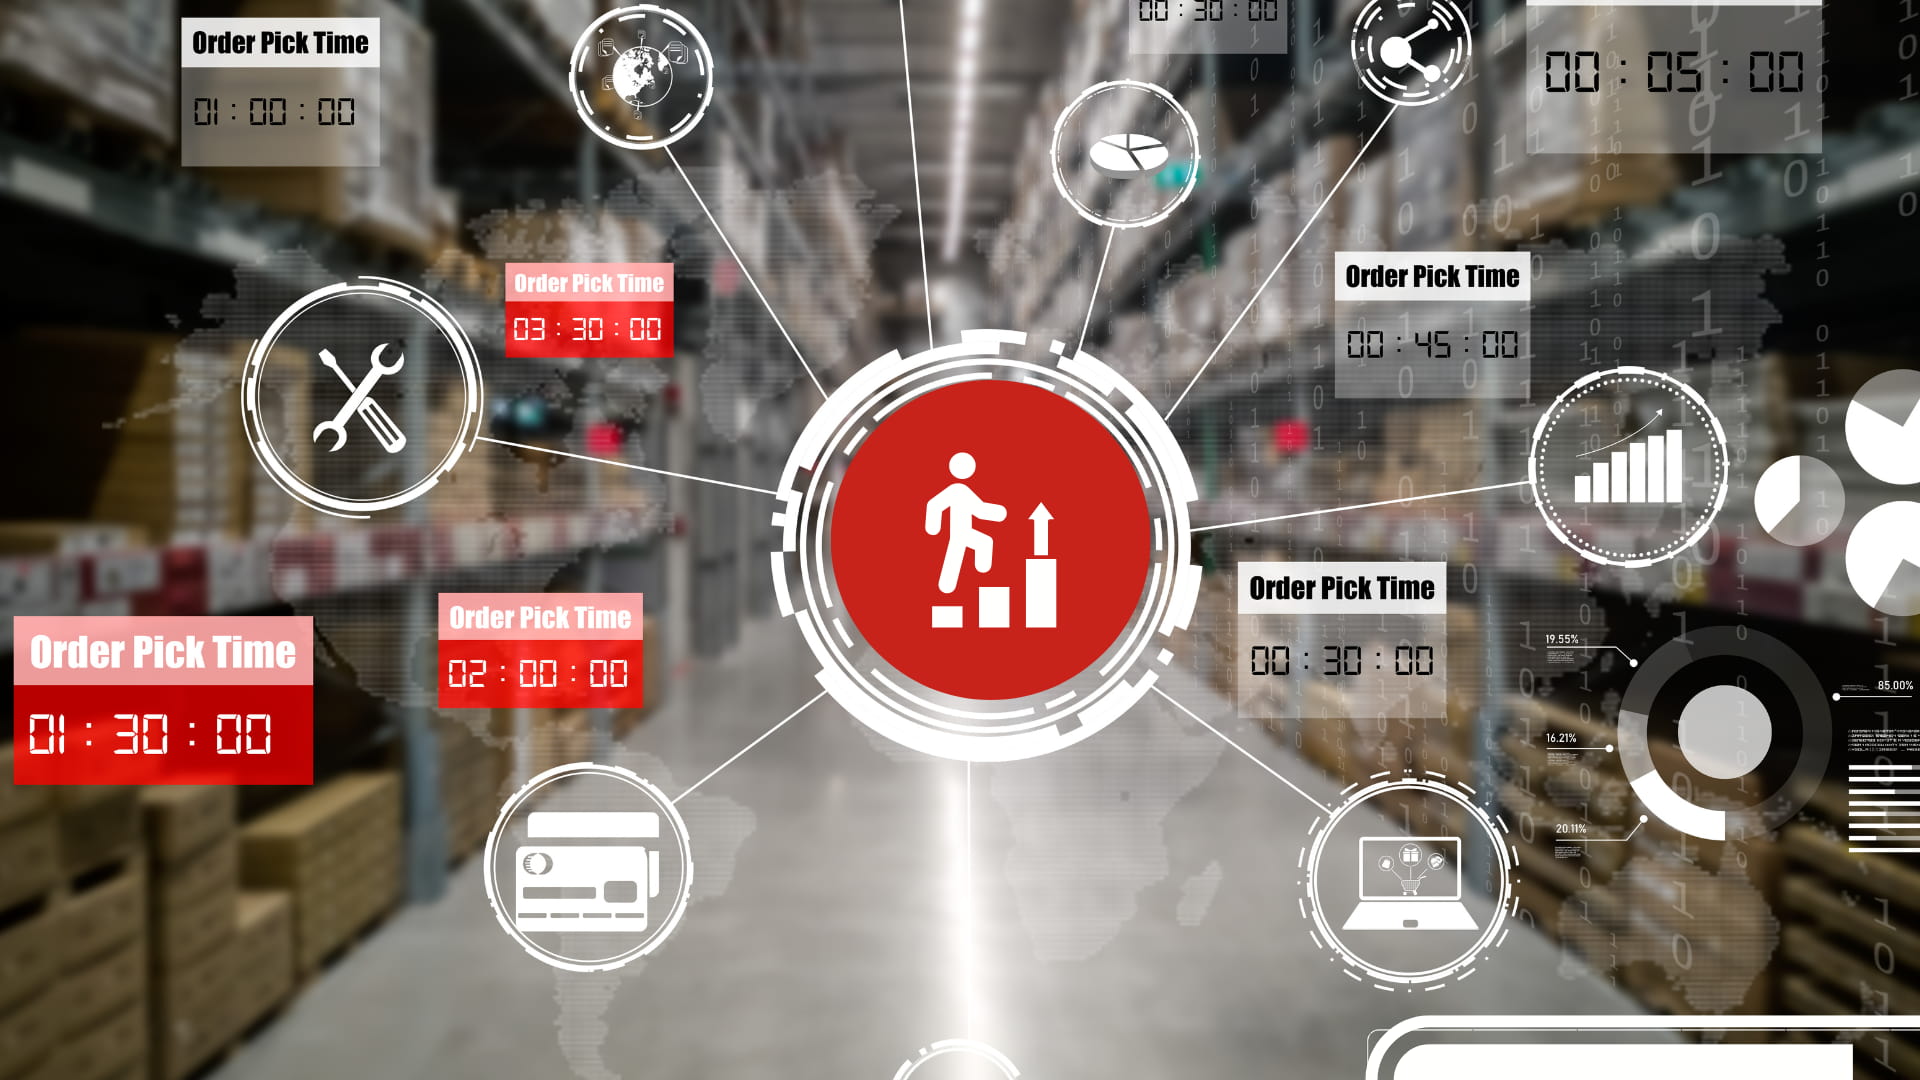 Technologies that can take your warehouse to the next level